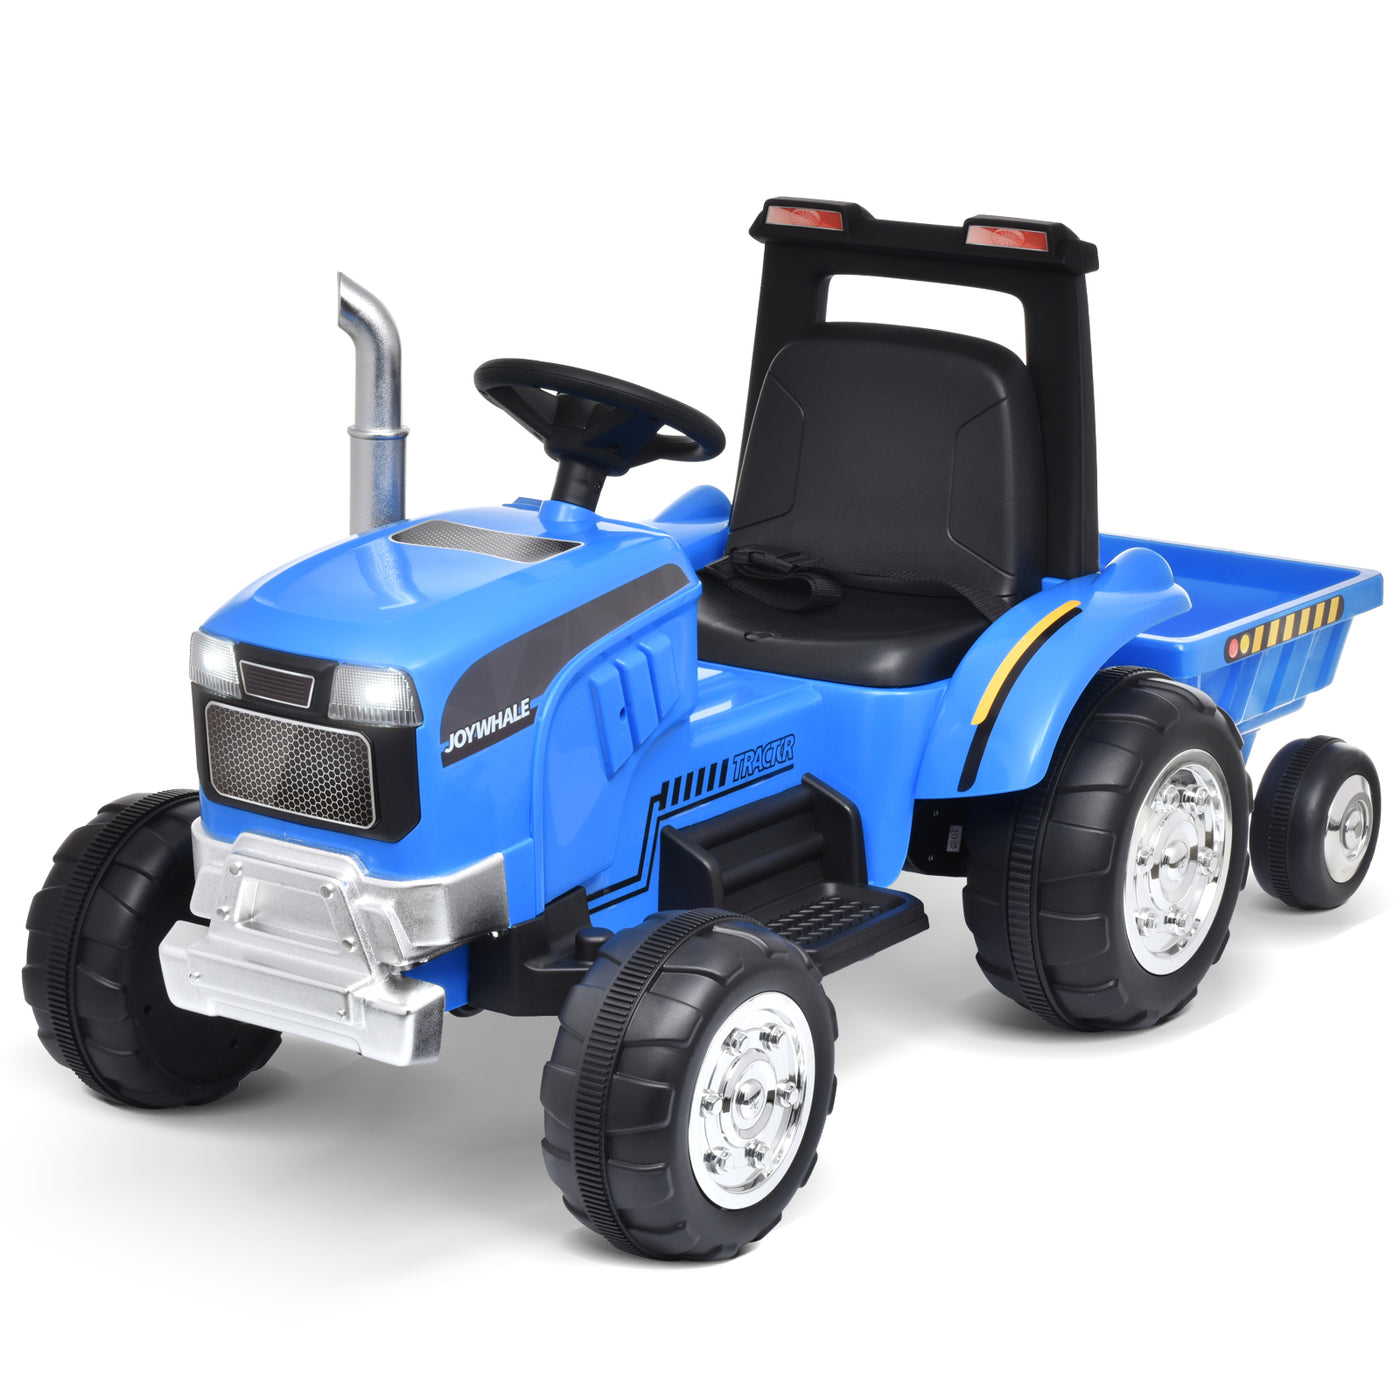 Joywhale 12V Kids Ride on Tractor with Trailer Battery Powered Electric Car for Kids Ages 3-6, with Detachable Trailer, Remote Control & Exhaust Pipe, DP-TR10